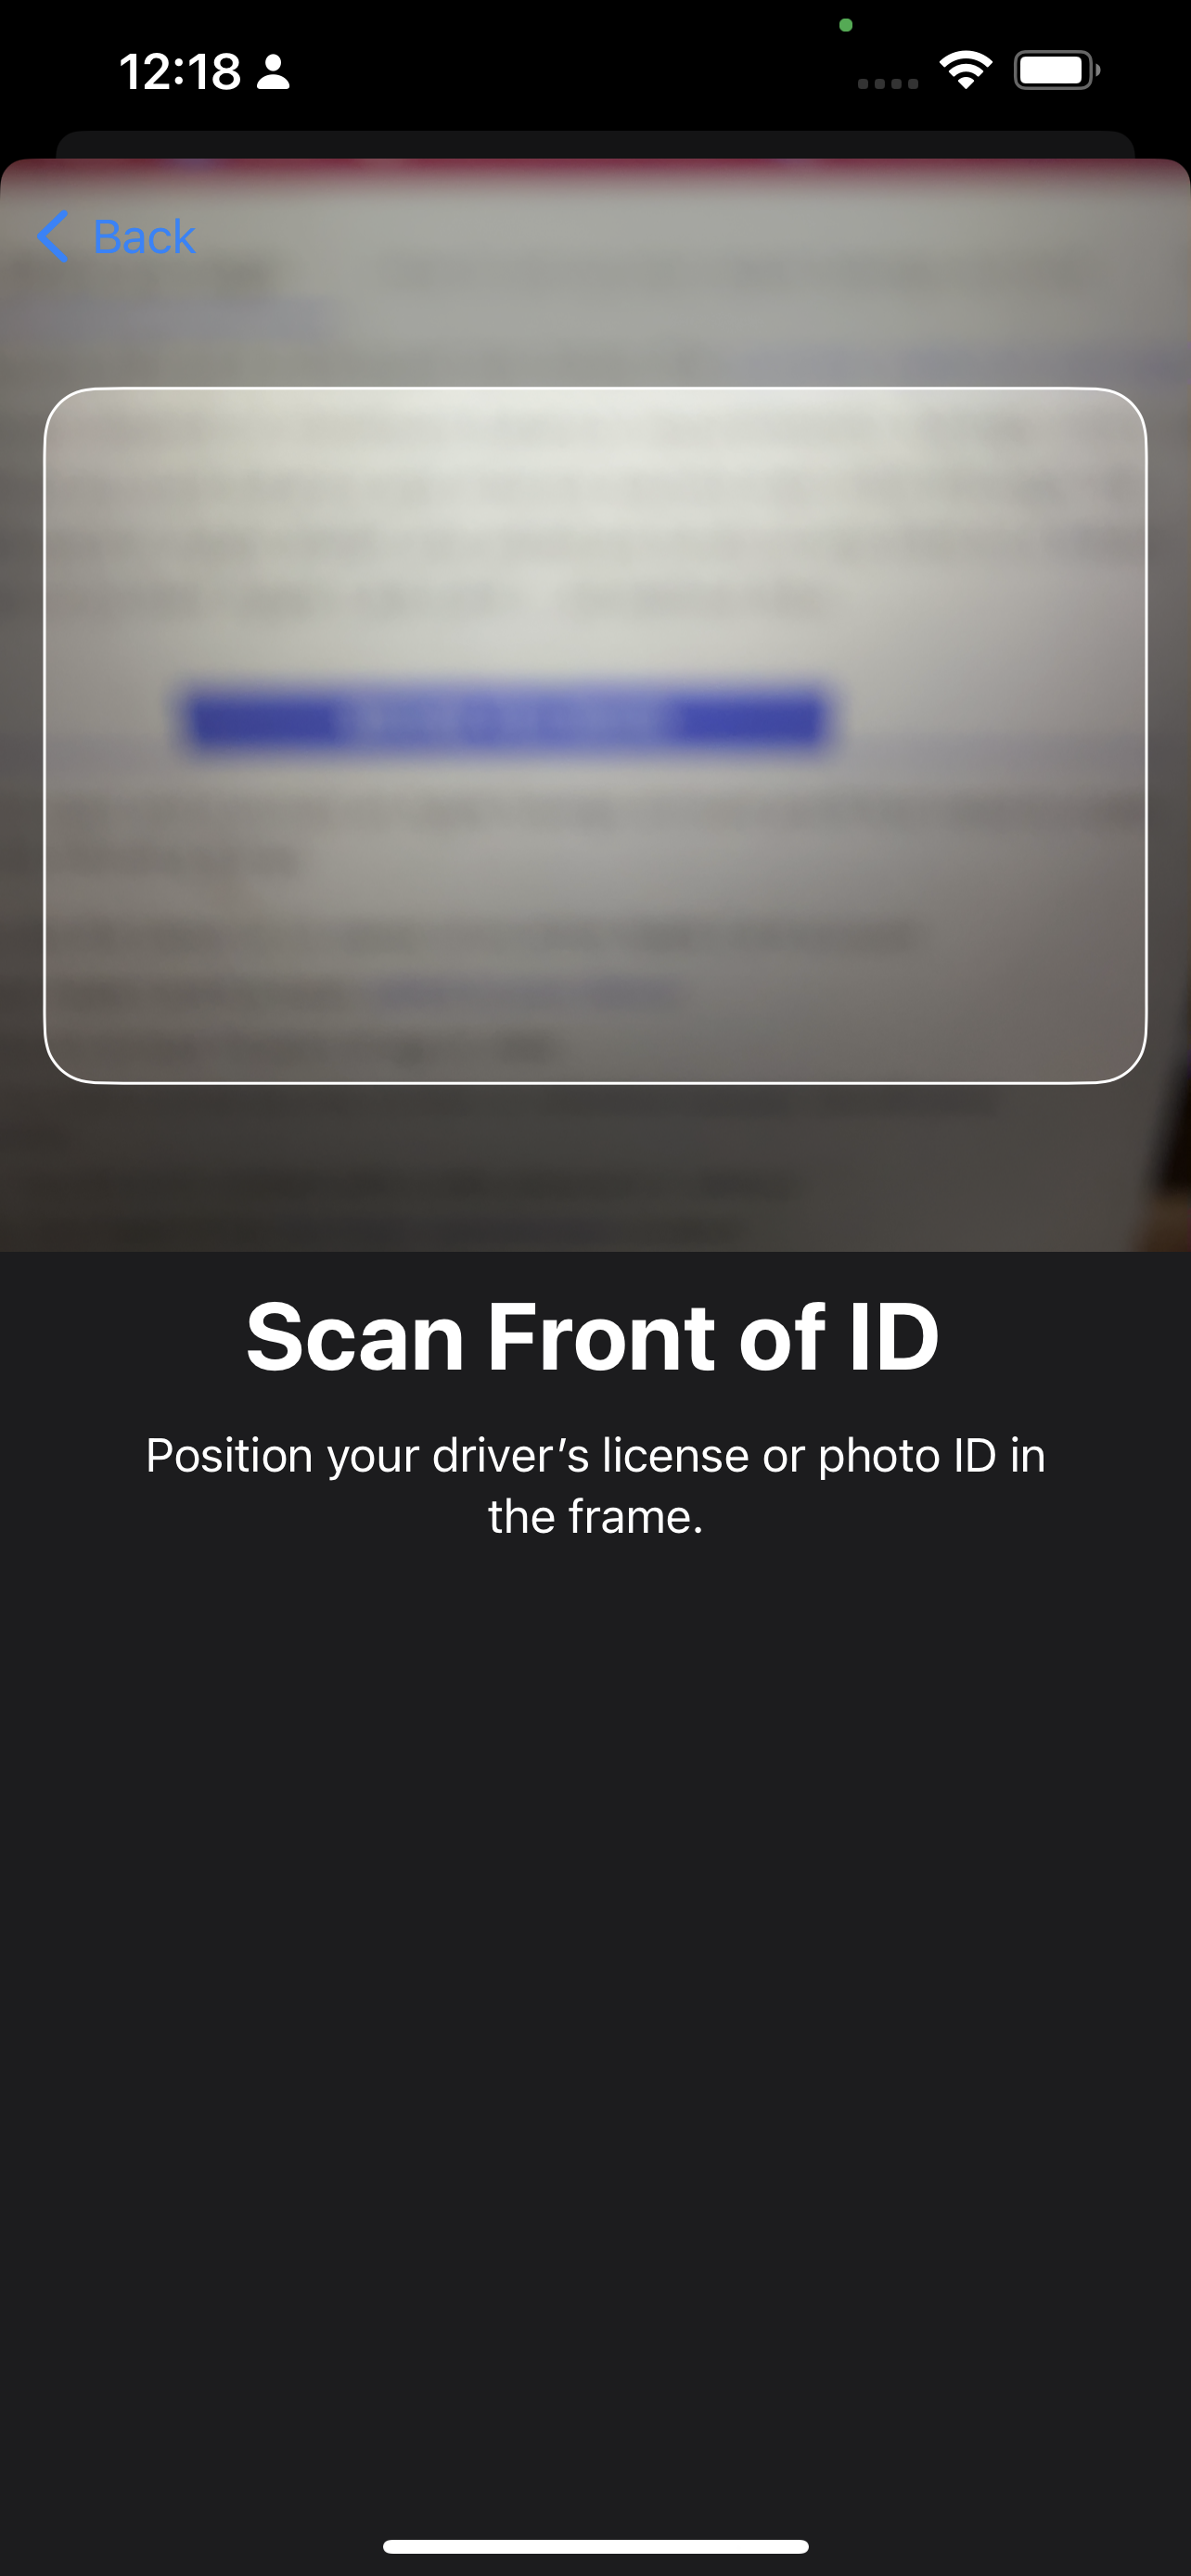 Scan ID for Apple Card